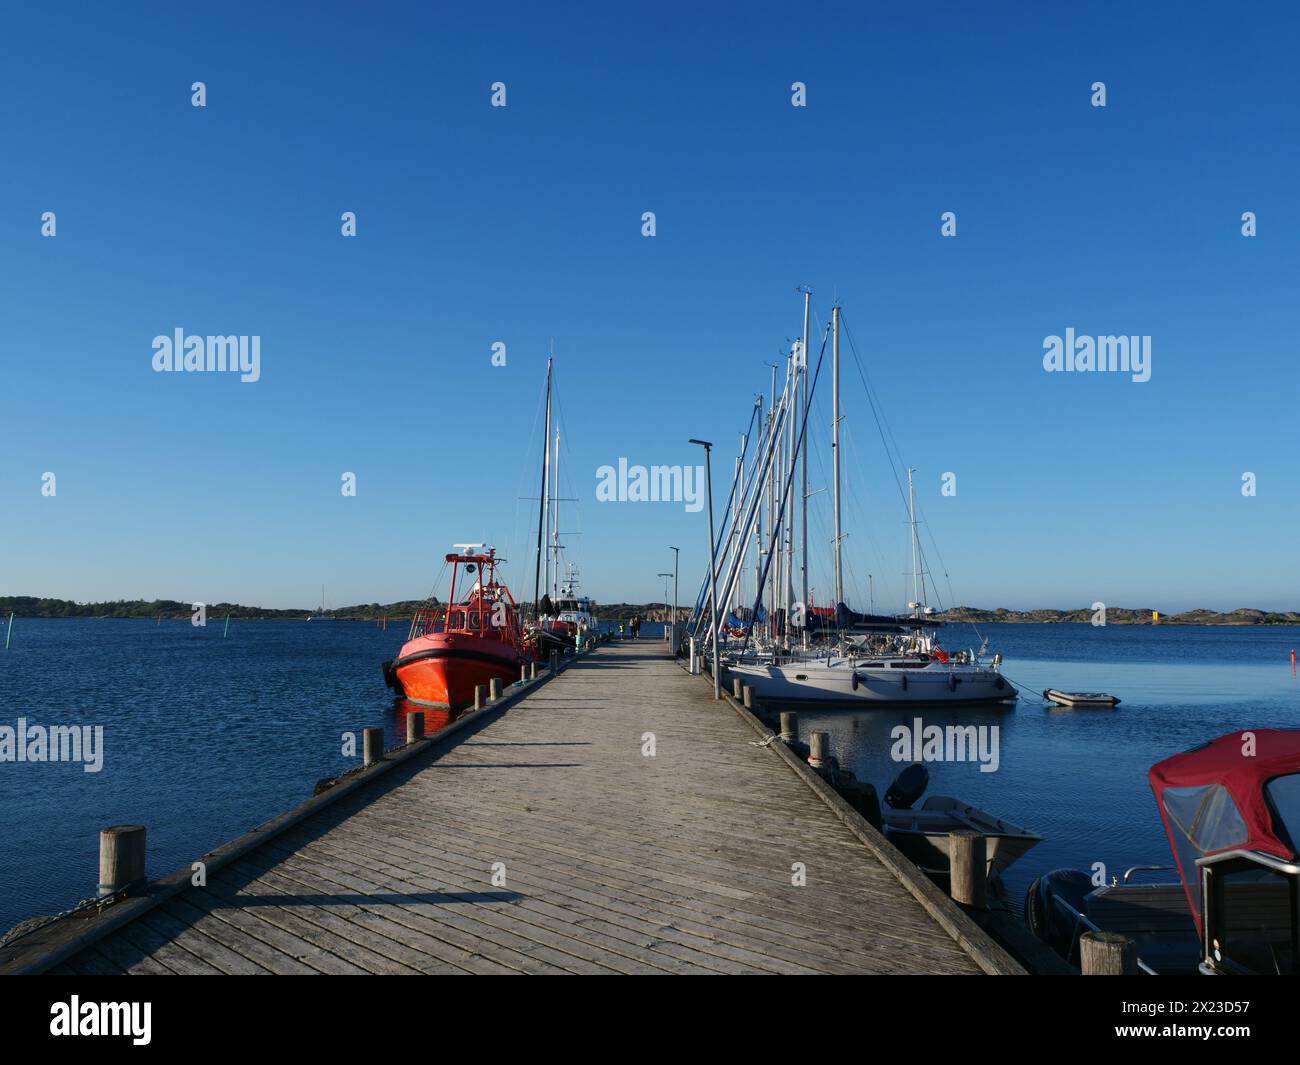 Far from the mainland, the rugged and beautiful Utö island, Finland Stock Photo